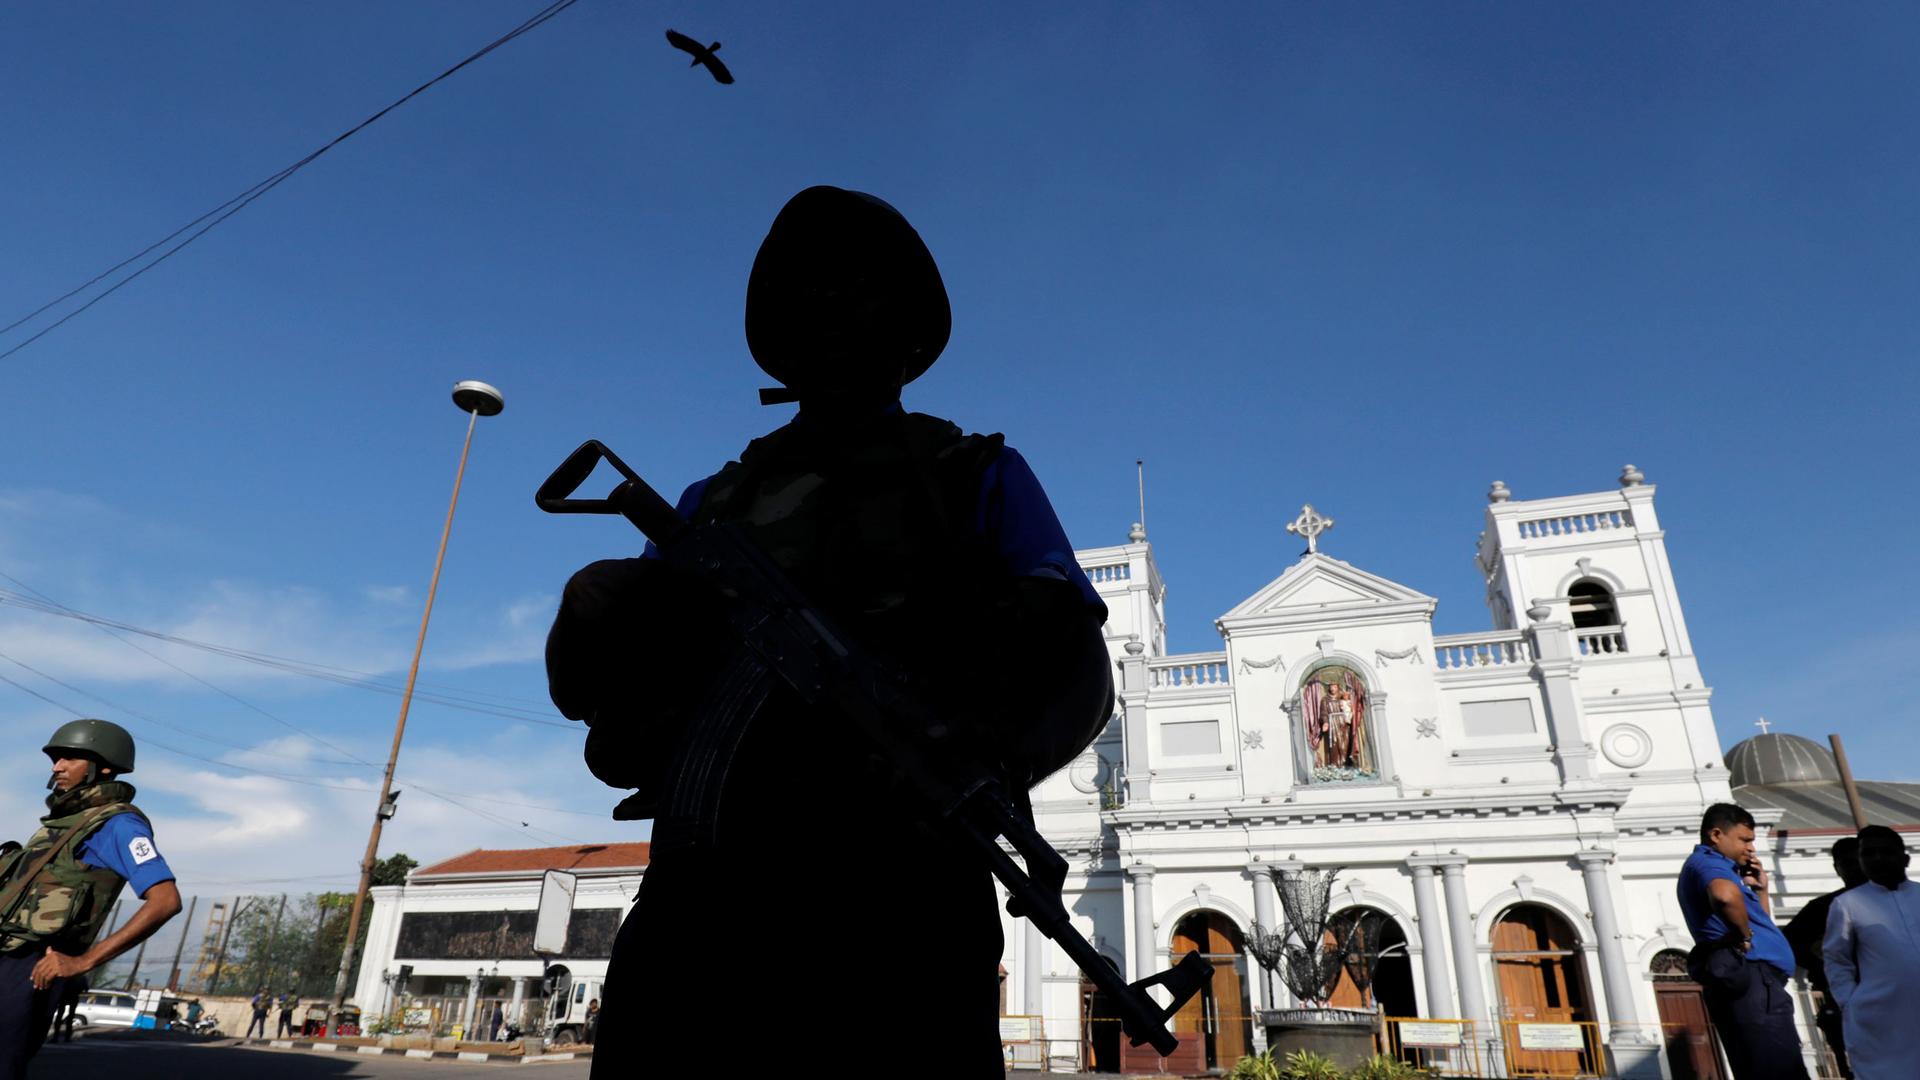 A security officer is shown standing in shadown and holding a gun with the white facade of St Anthony's shrine in the background.